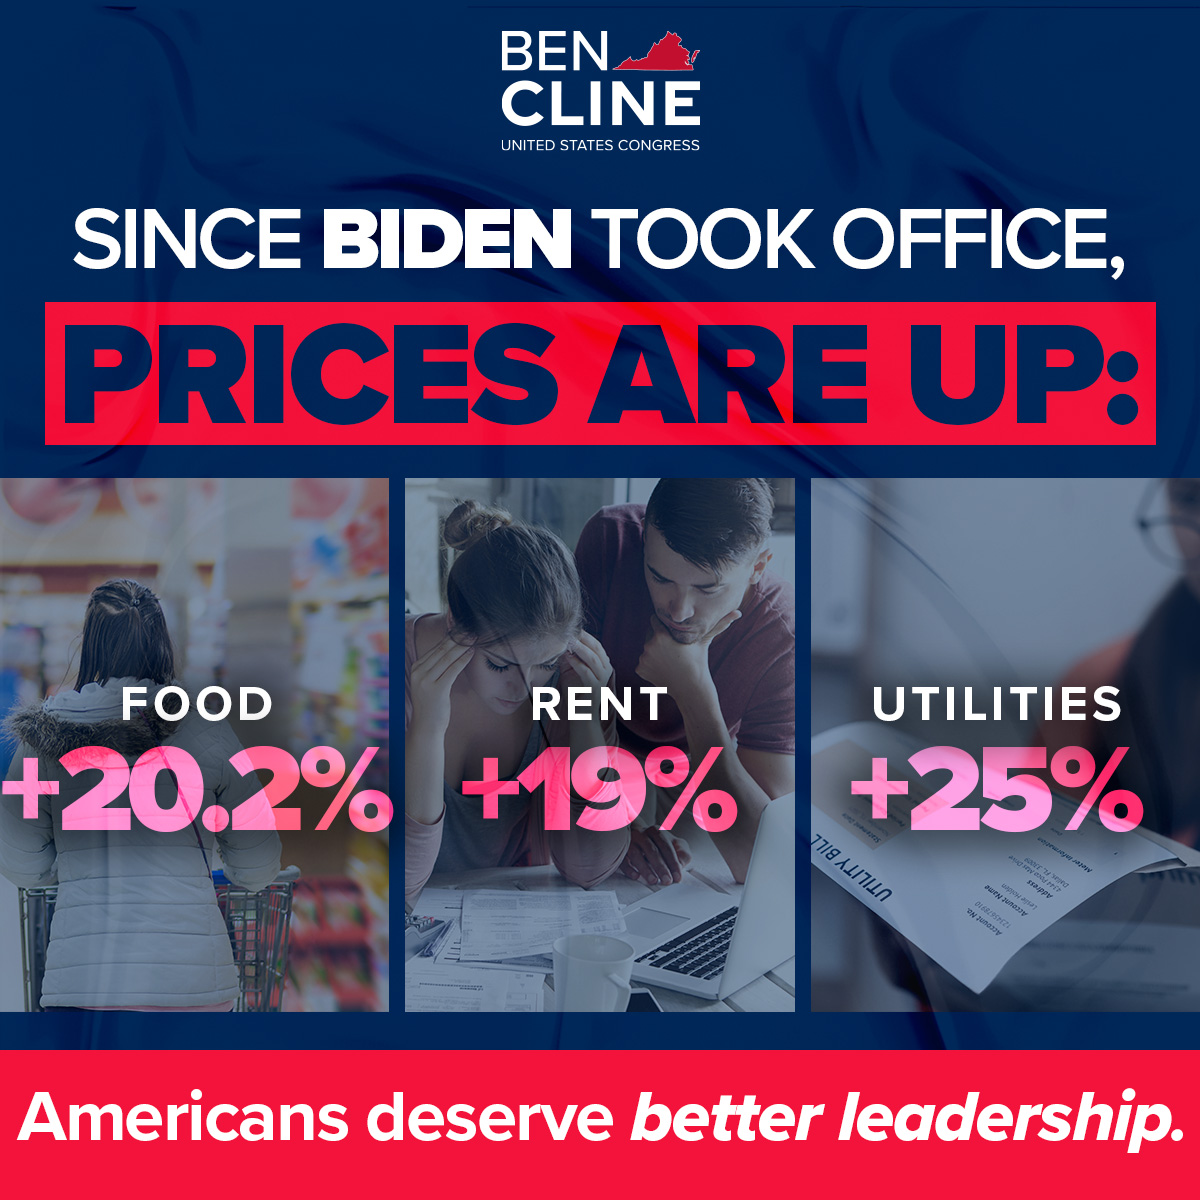 Since Biden took office, prices have surged by 17.3%, with inflation averaging 5.7%—double that of the last four presidents. Food prices up 20.2%, rent up 19%, and utilities up 25%. The impact is hitting hard. Americas deserve better leadership.